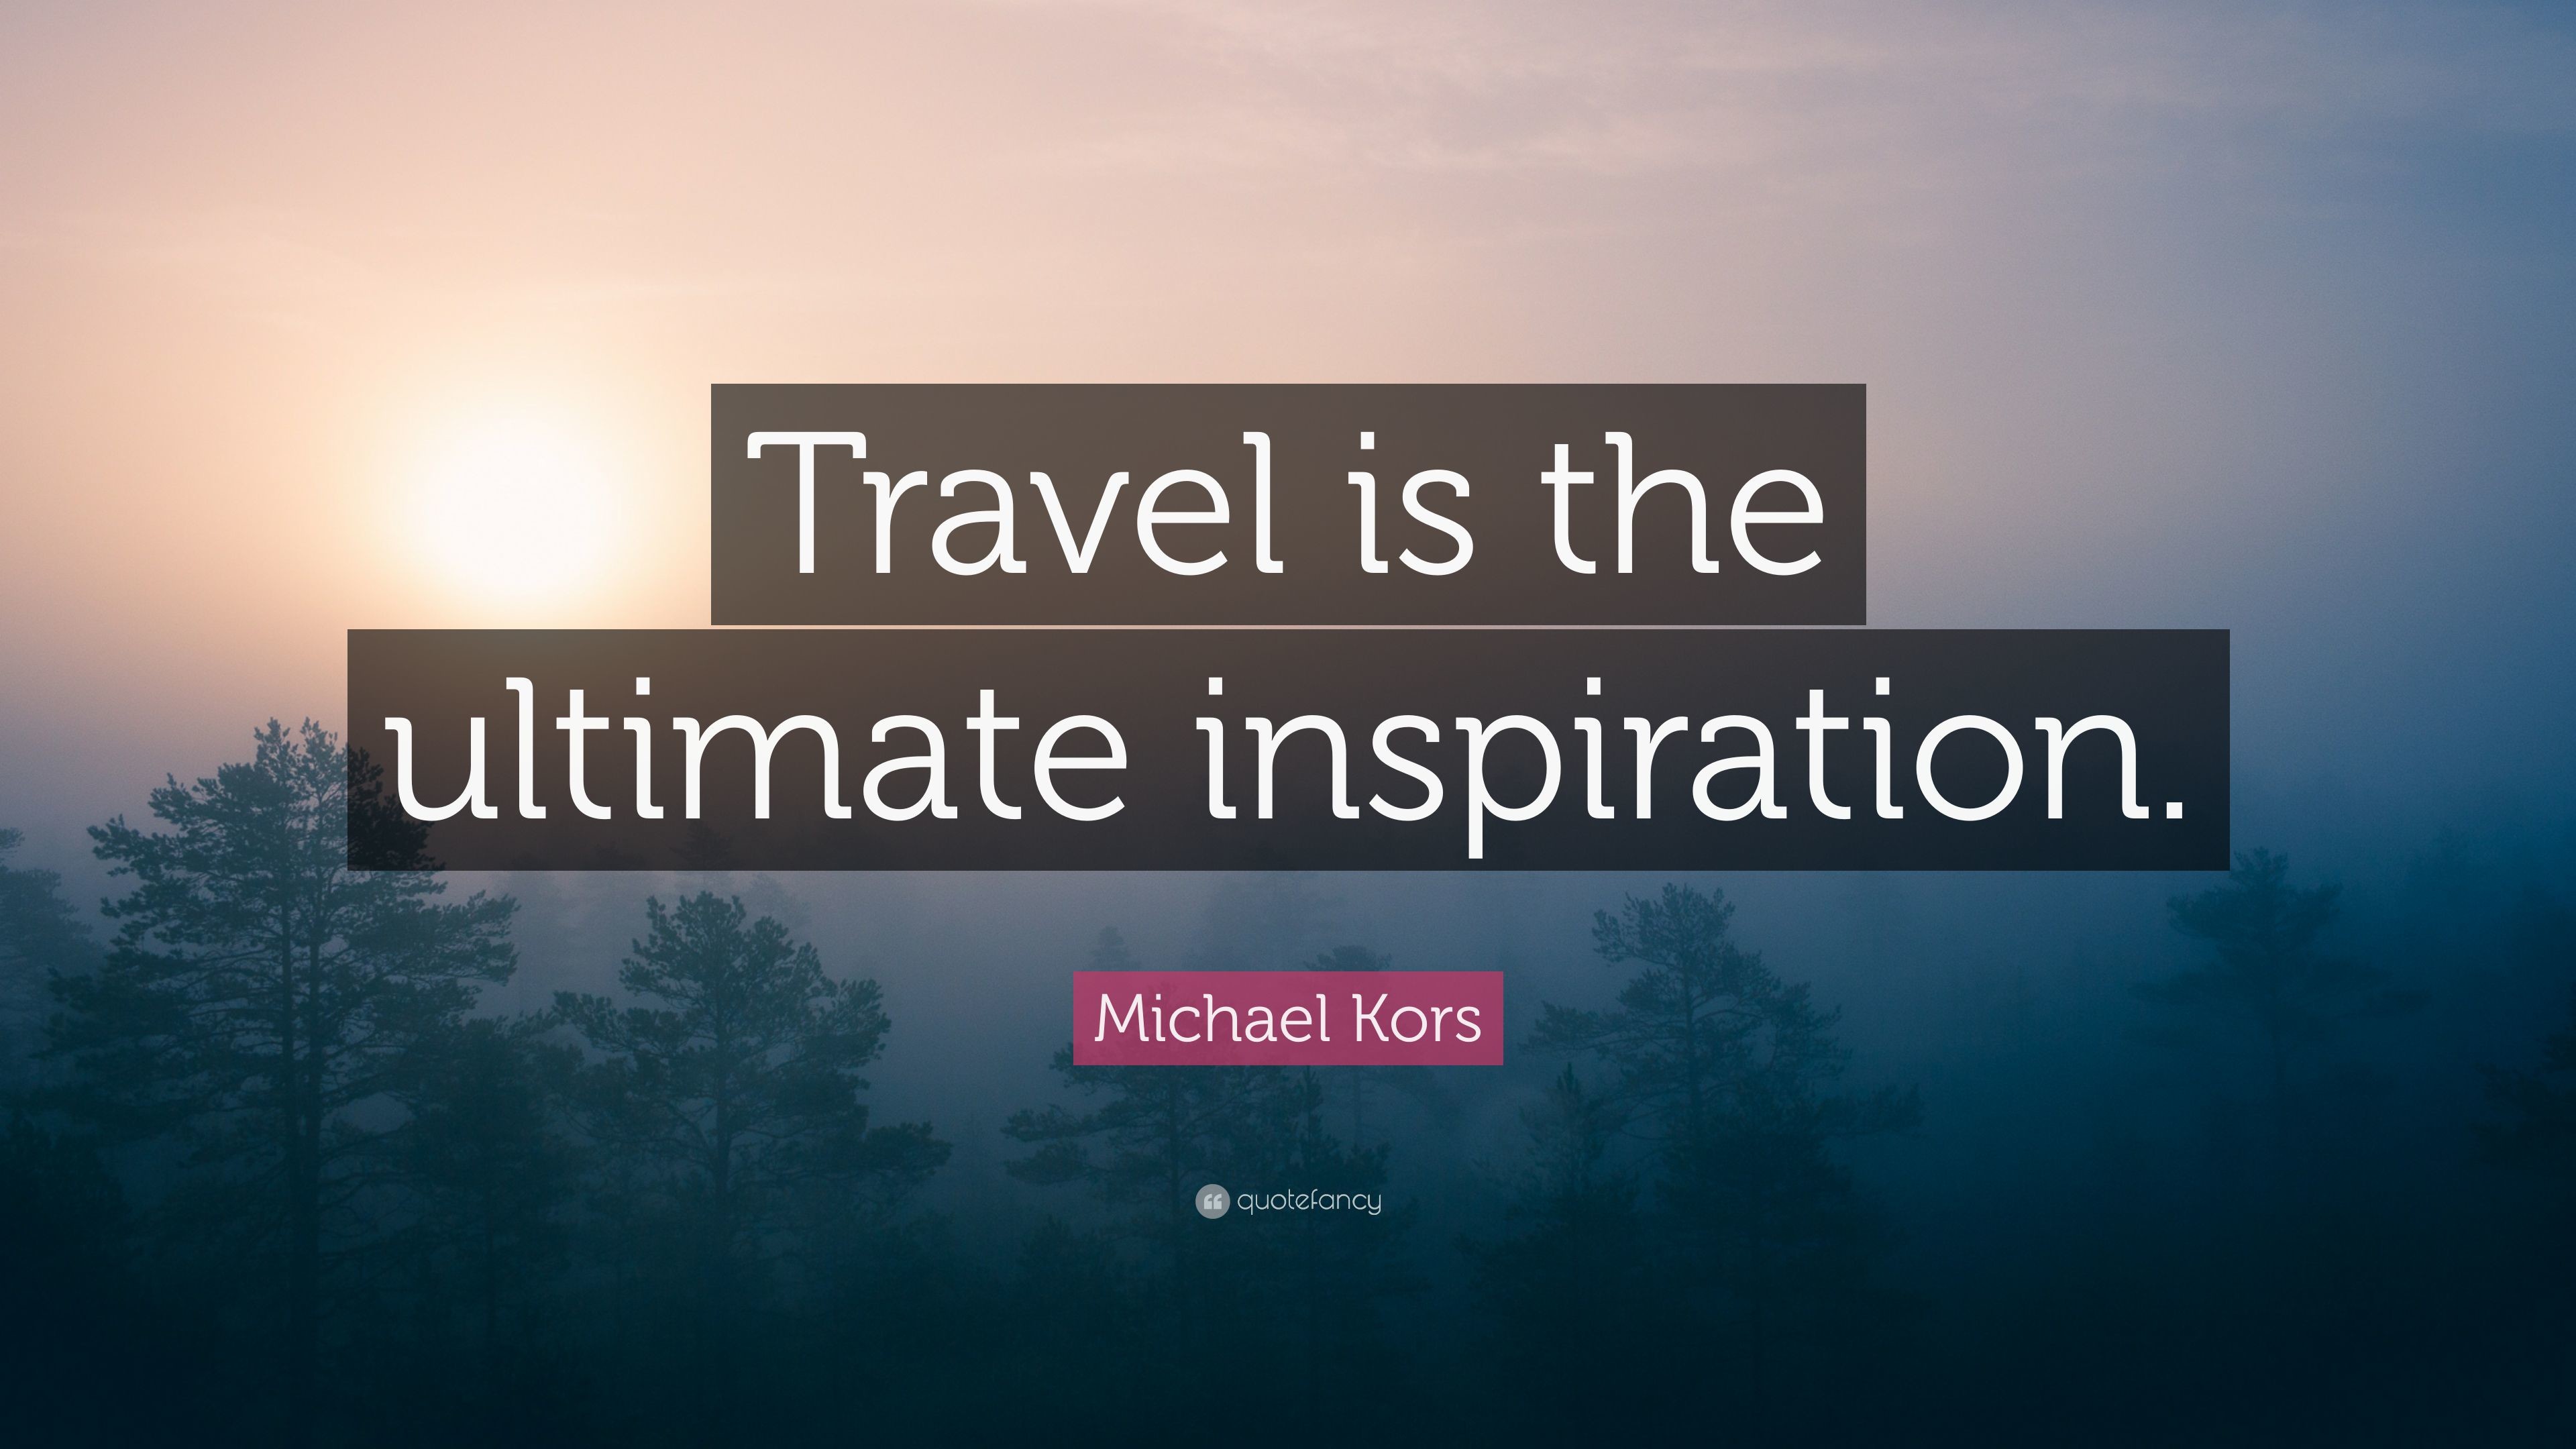 3840x2160 Michael Kors Quote: “Travel is the ultimate inspiration.”